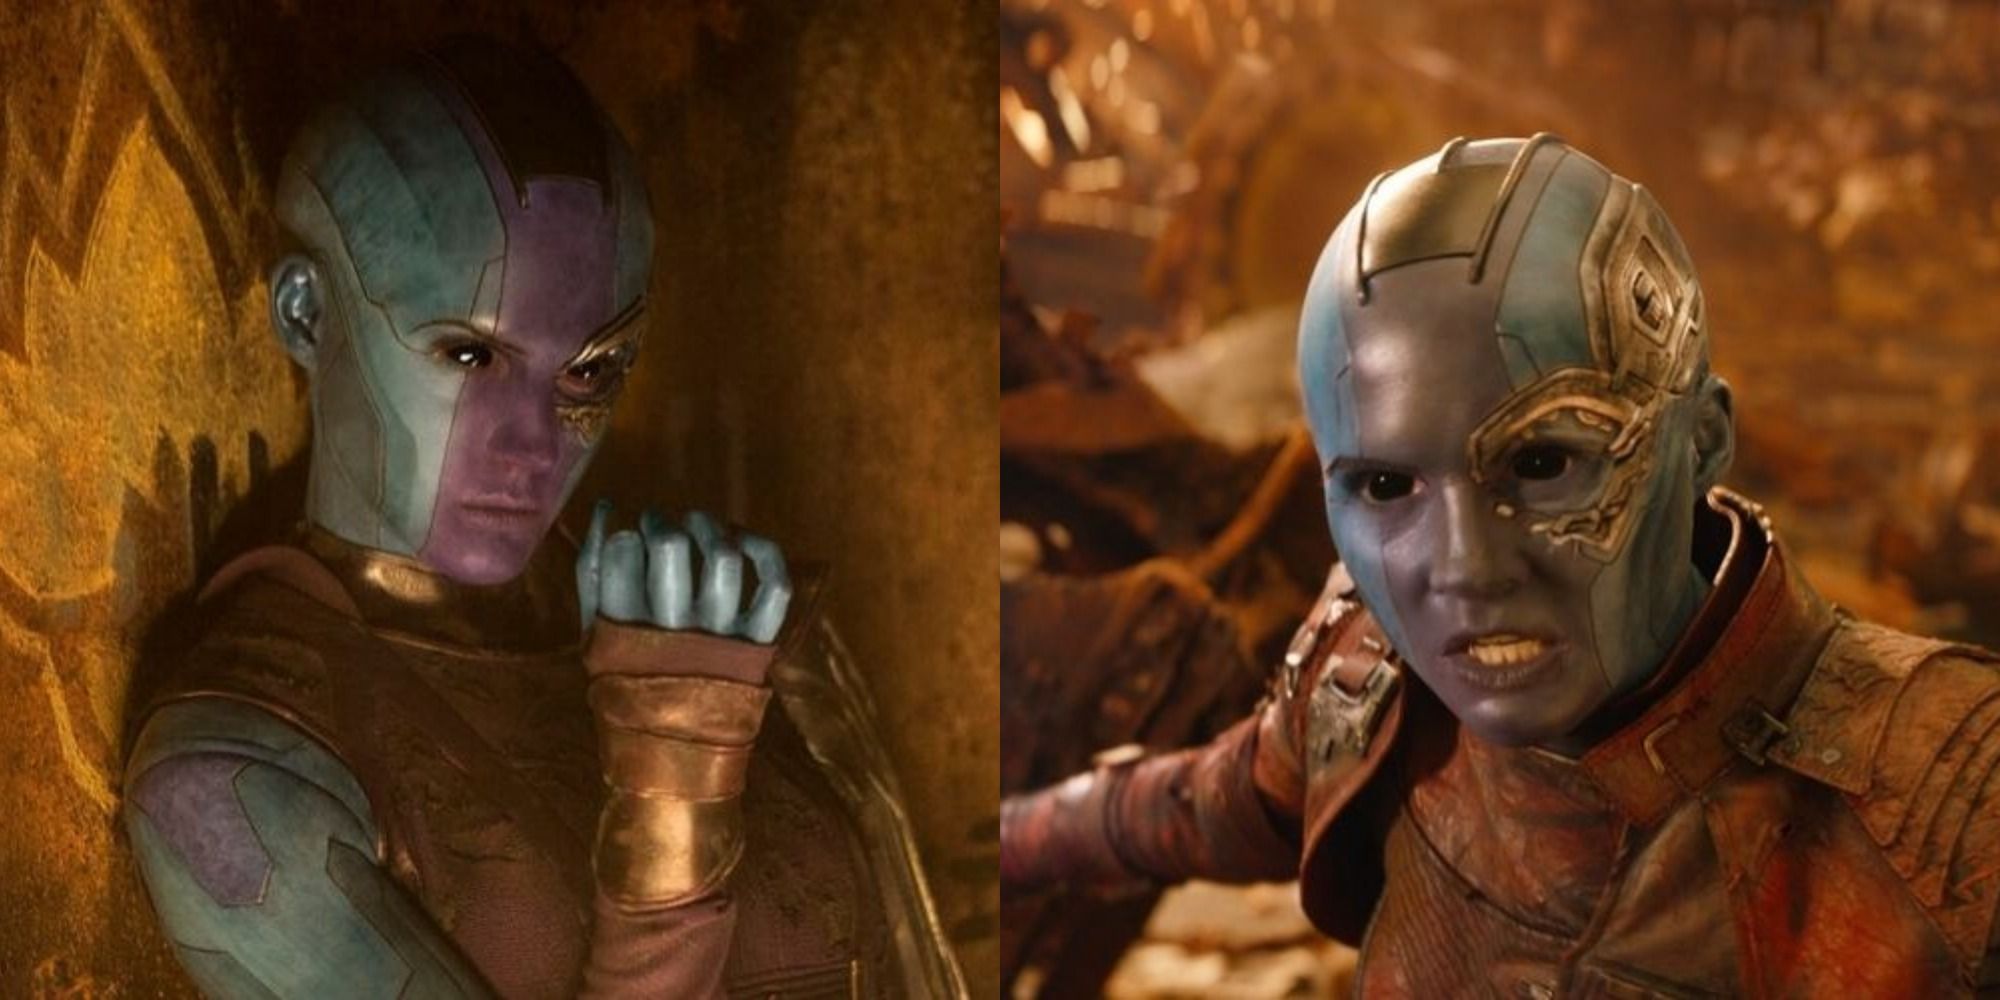 Nebula leans on a wall/Fights with a grimace